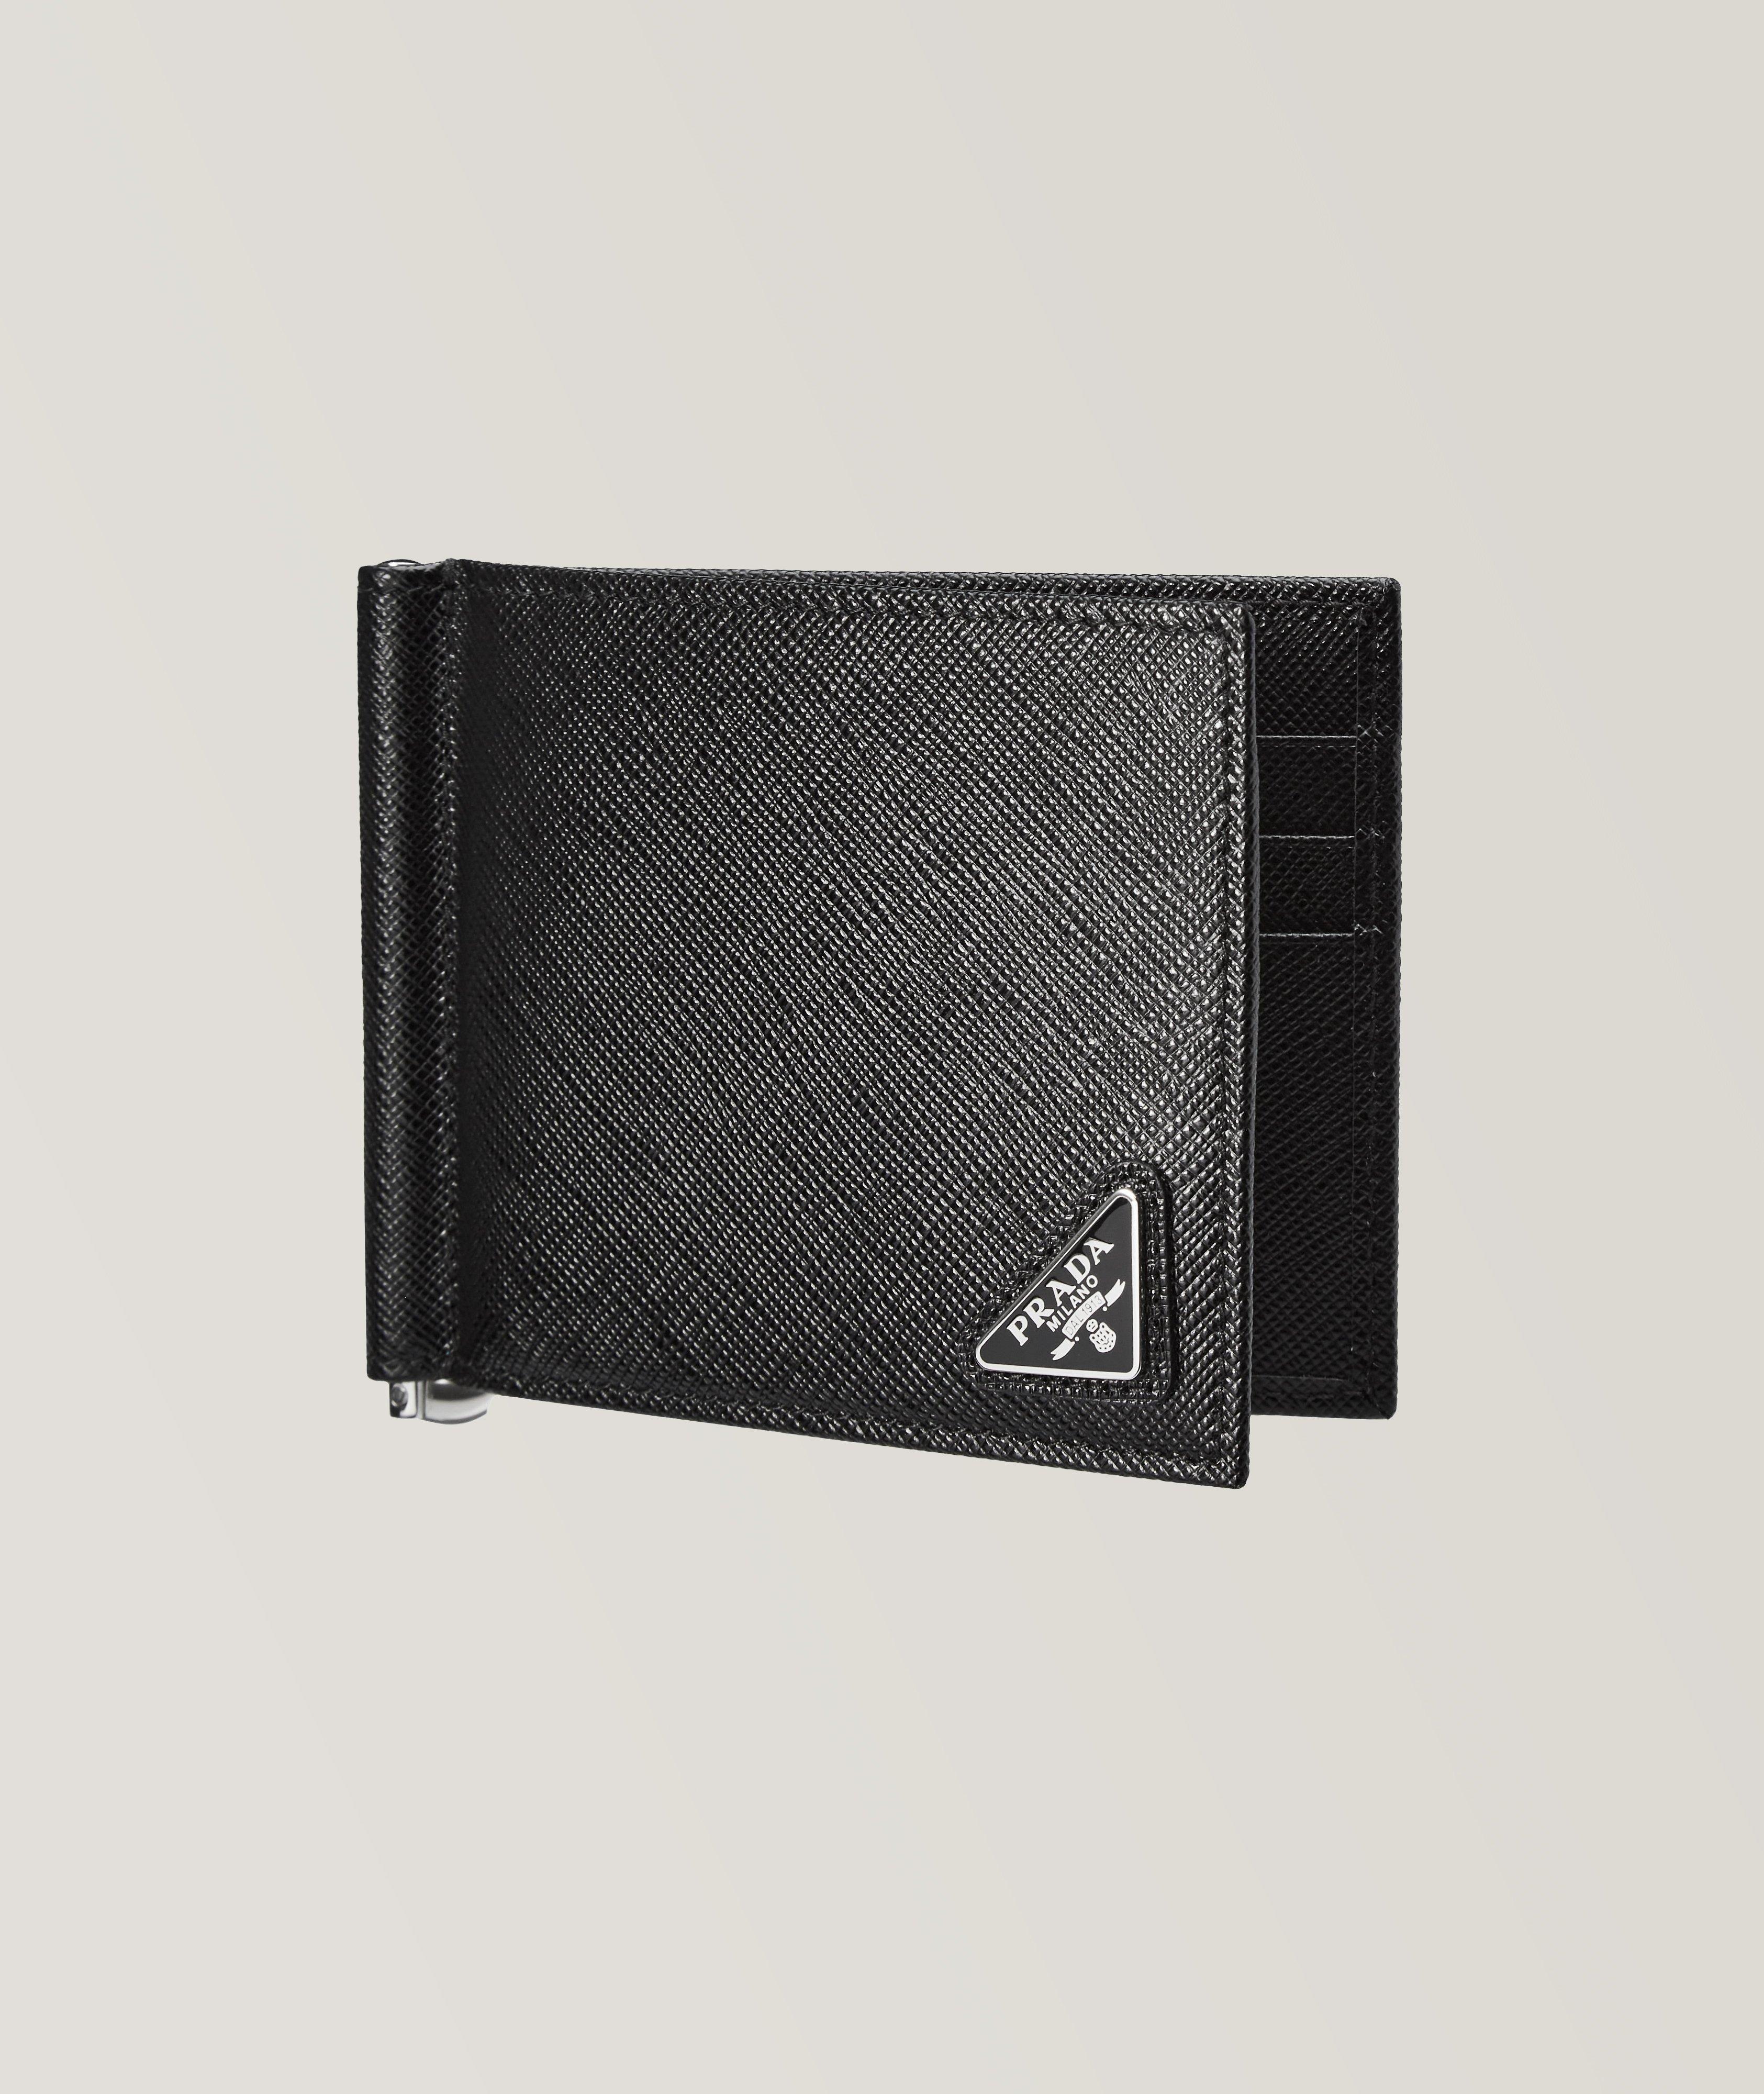 Saffiano Leather Bifold Wallet